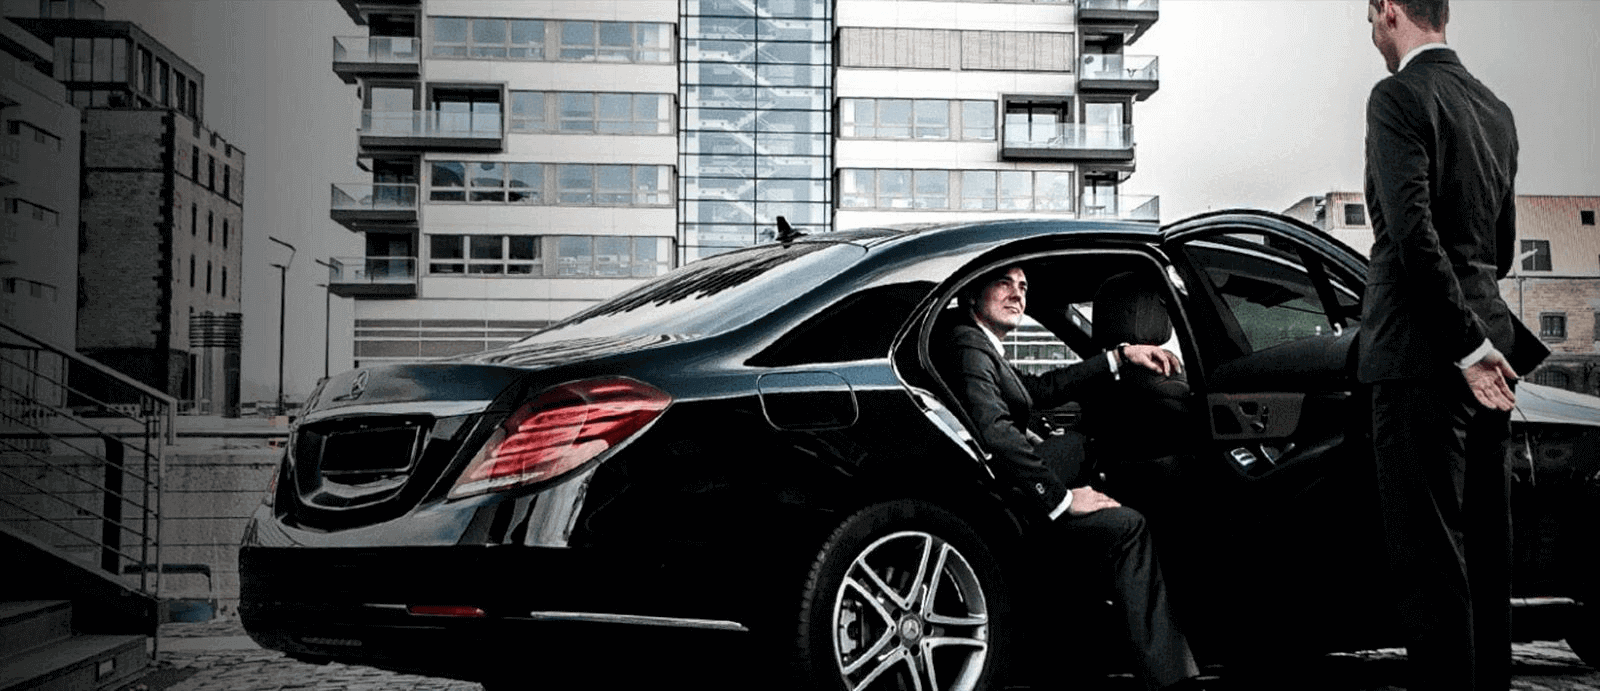 Limousine Service In London: Why Should You Consider Hiring One